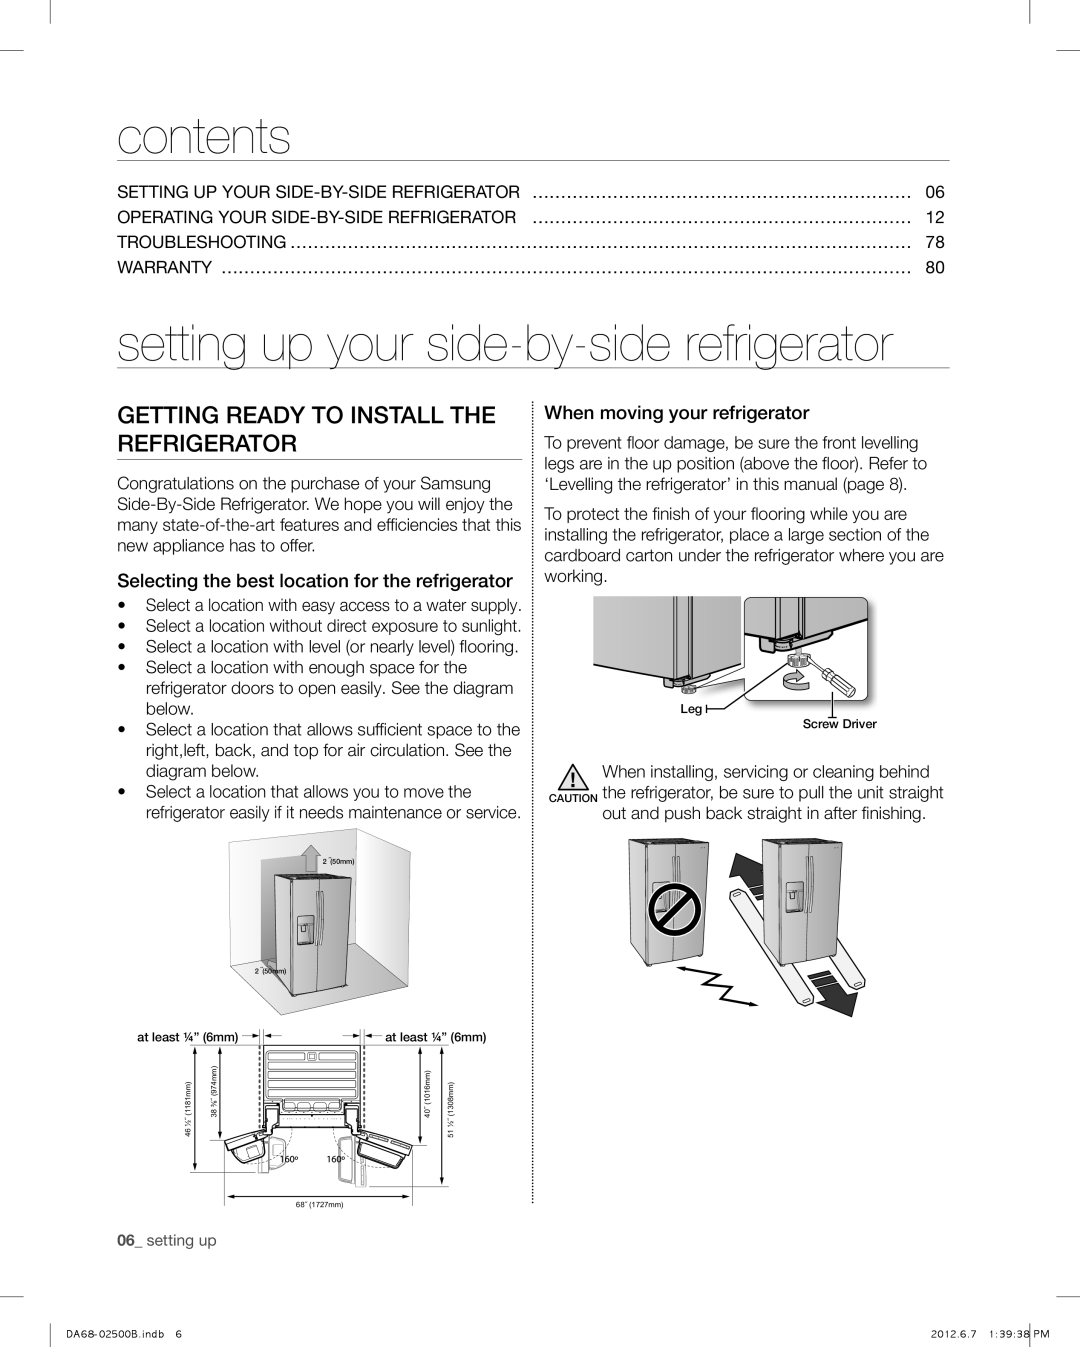 Samsung RSG309AARS contents, setting up your side-by-side refrigerator, Getting ready to install the refrigerator 